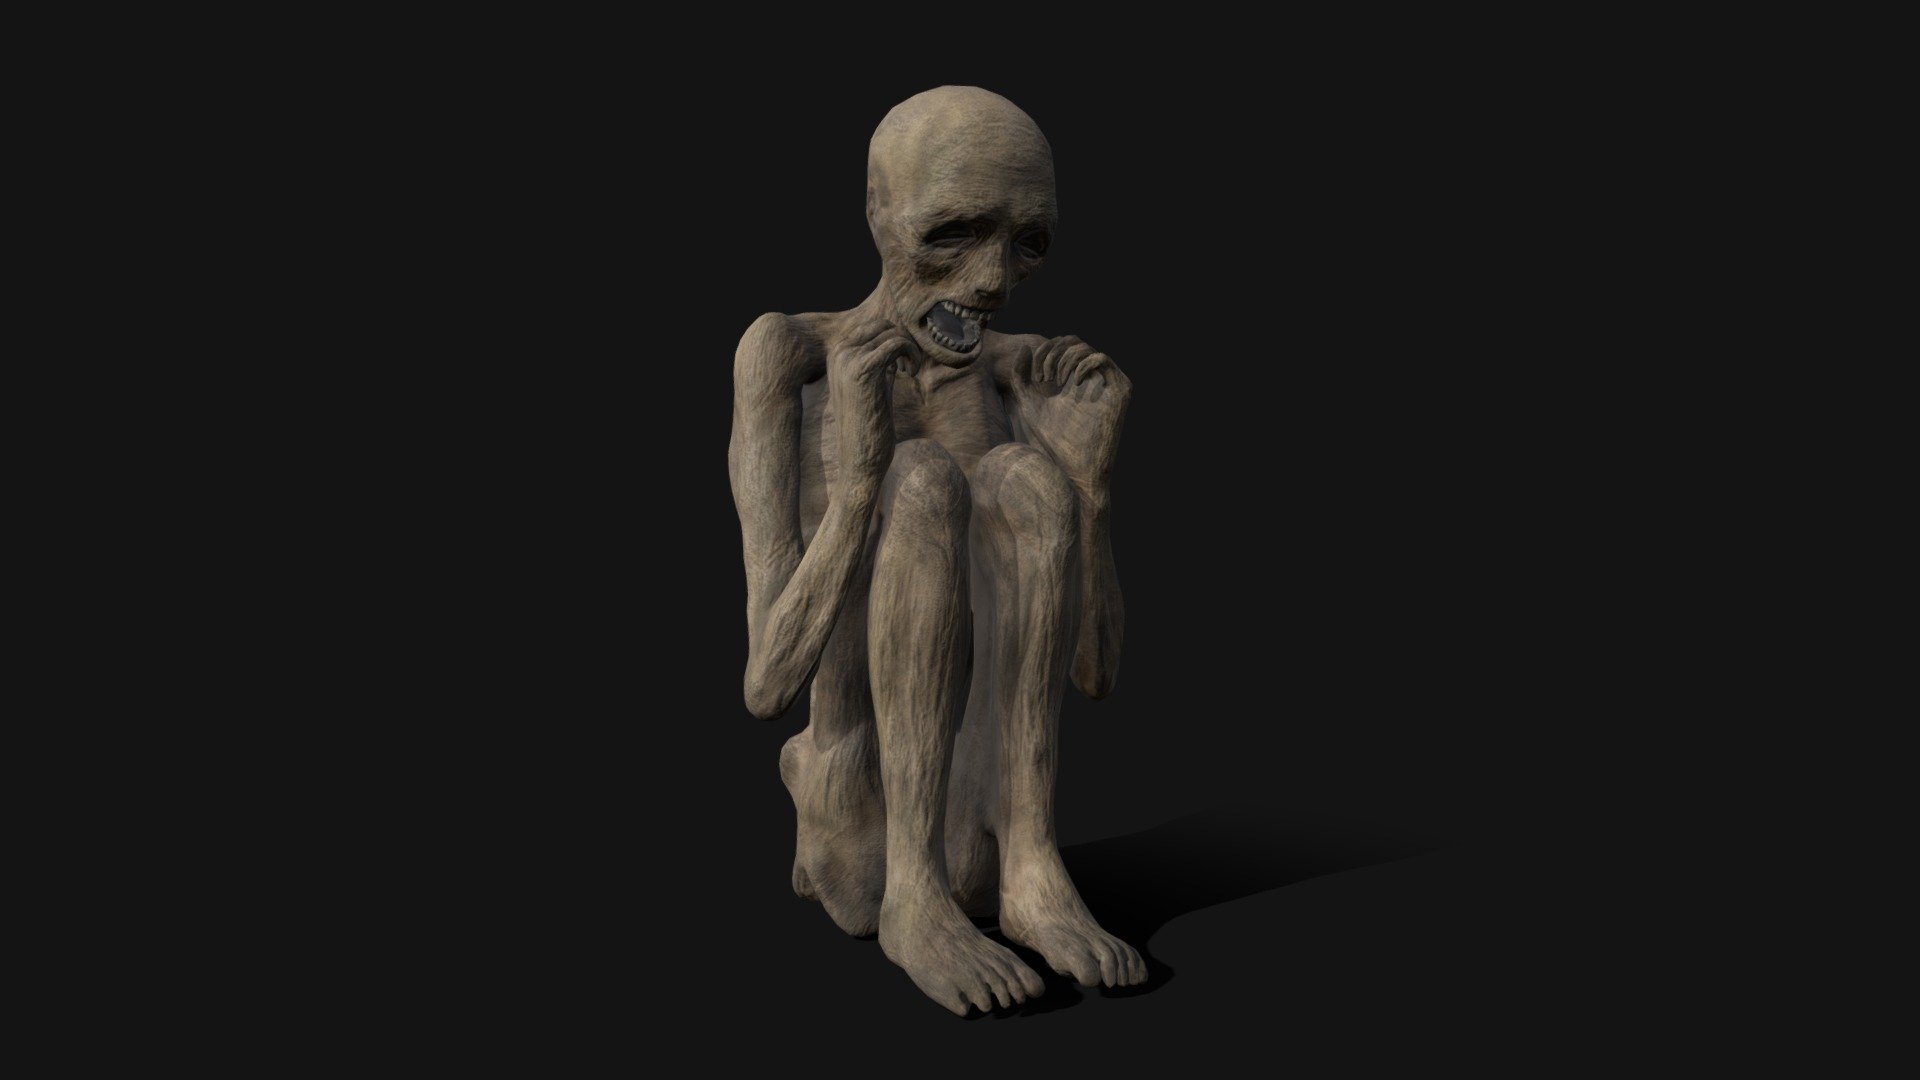 Naked Mummified Corpse 3D Model. This model contains the Naked Mummified Corpse itself 

All modeled in Maya, textured with Substance Painter.

The model was built to scale and is UV unwrapped properly. Contains a 4K and 2K texture set.  

⦁   20799 tris. 

⦁   Contains: .FBX .OBJ and .DAE

⦁   Model has clean topology. No Ngons.

⦁   Built to scale

⦁   Unwrapped UV Map

⦁   4K Texture set

⦁   High quality details

⦁   Based on real life references

⦁   Renders done in Marmoset Toolbag

Polycount: 

Verts 10656

Edges 21050 

Faces 10423

Tris 20799

If you have any questions please feel free to ask me 3d model